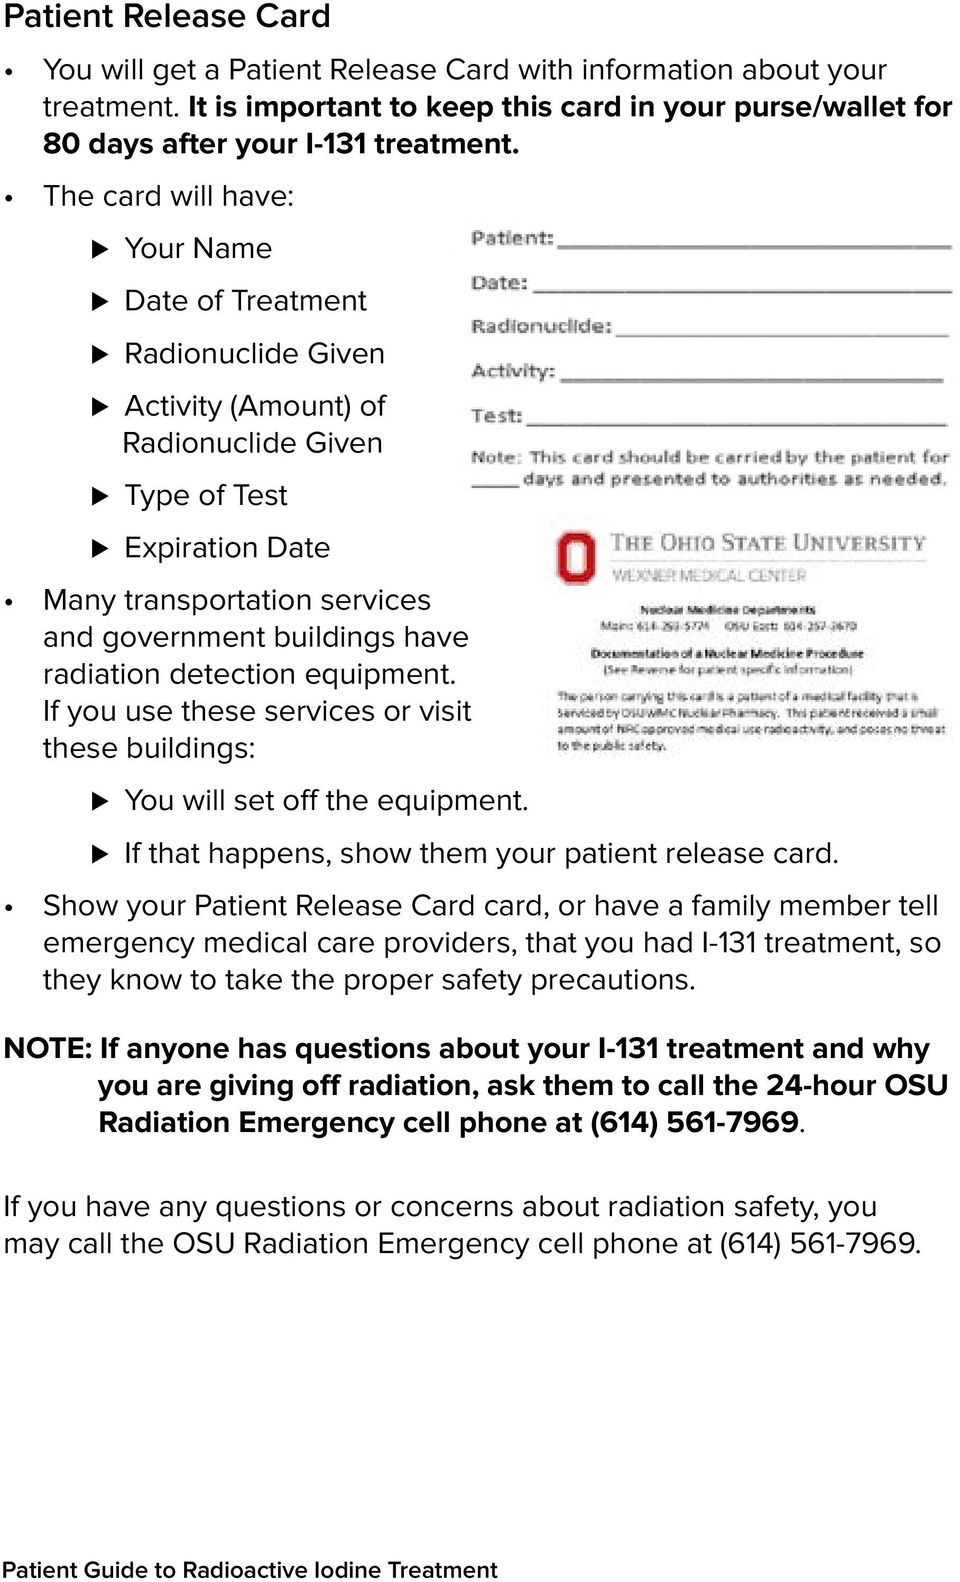 radiation detection equipment. If you use these services or visit these buildings: You will set off the equipment. If that happens, show them your patient release card.